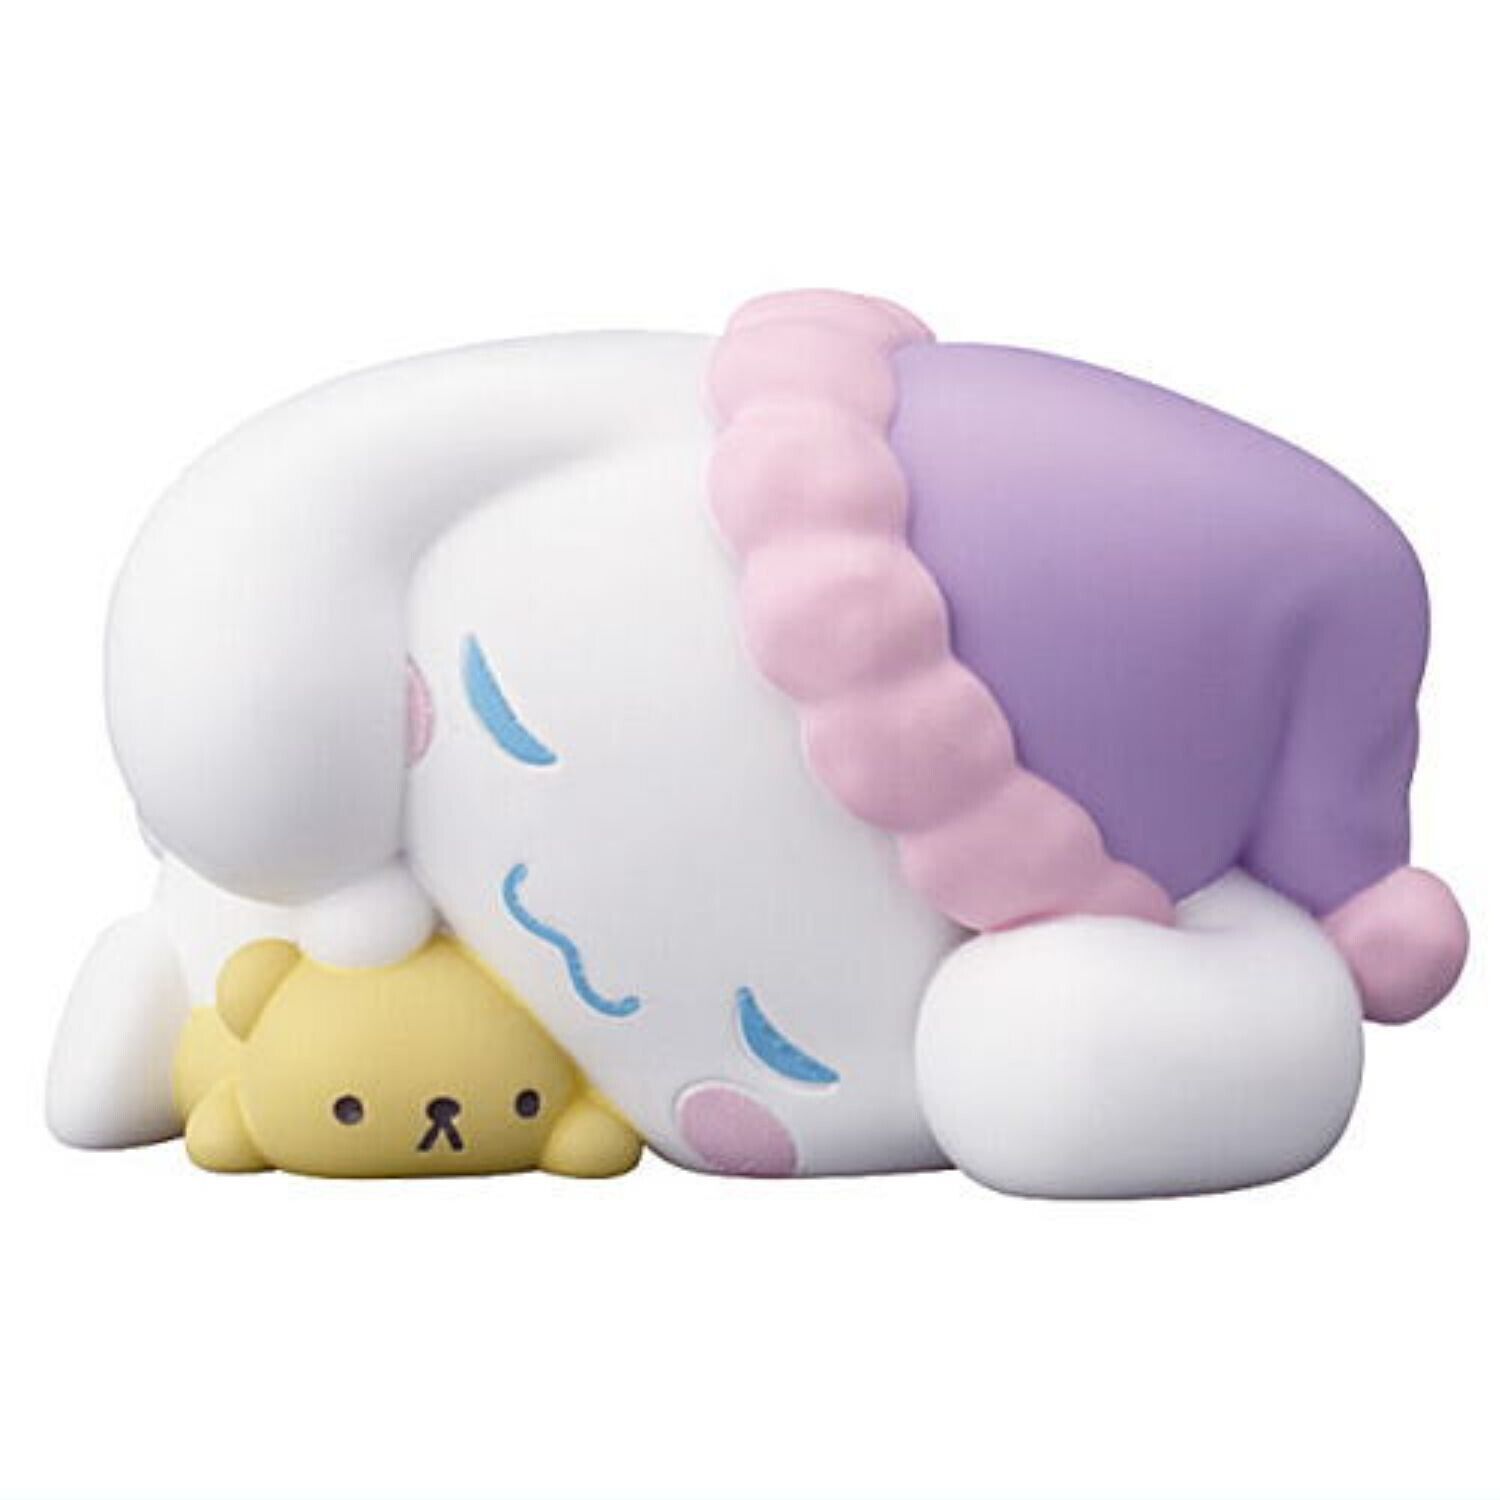 Sanrio Characters Friends 2 BANDAI Collection Toy [8.Cinnamoroll ] Mascot New